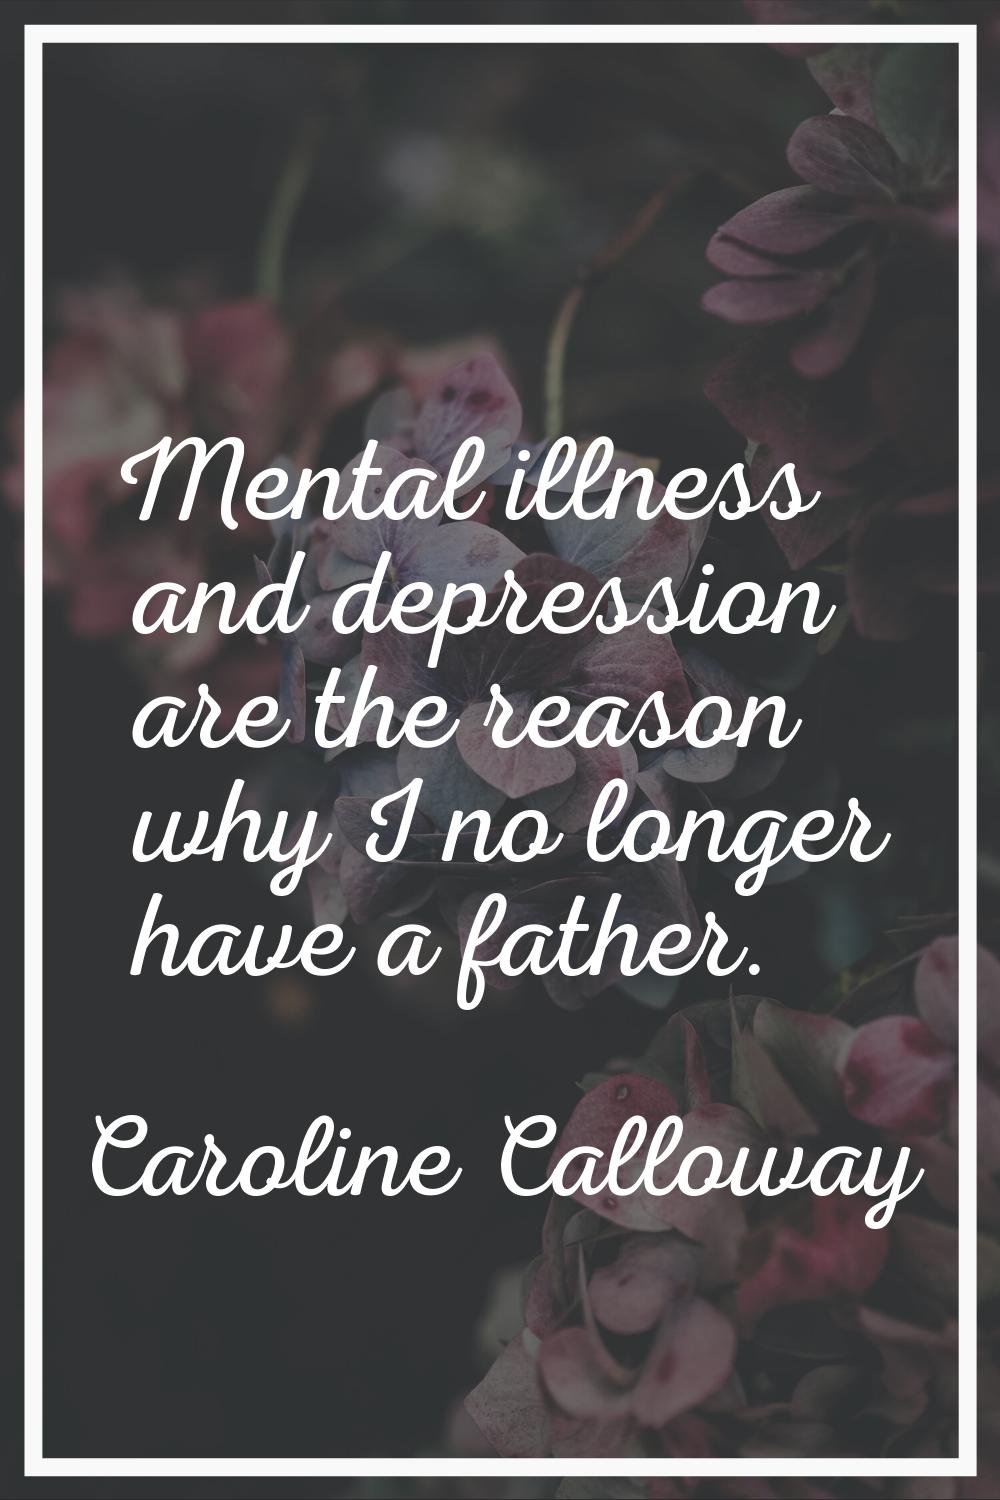 Mental illness and depression are the reason why I no longer have a father.